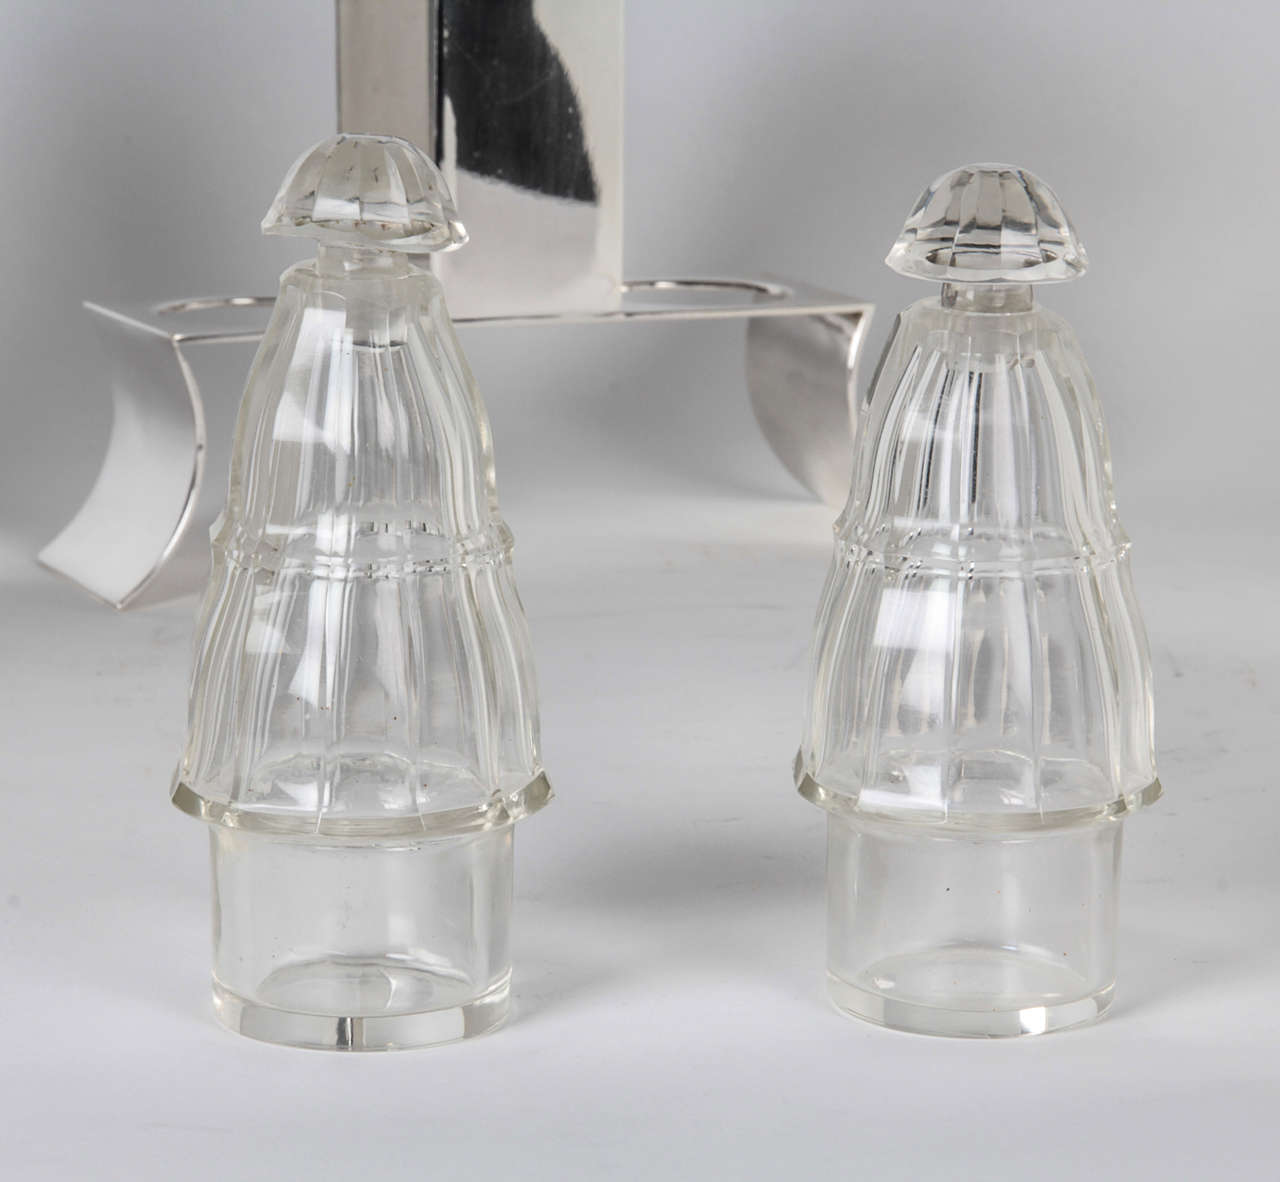 Josef Hoffmann Wiener Werkstatte Silverplate and Crystal Cruet Set c.1922 In Excellent Condition For Sale In New York, NY